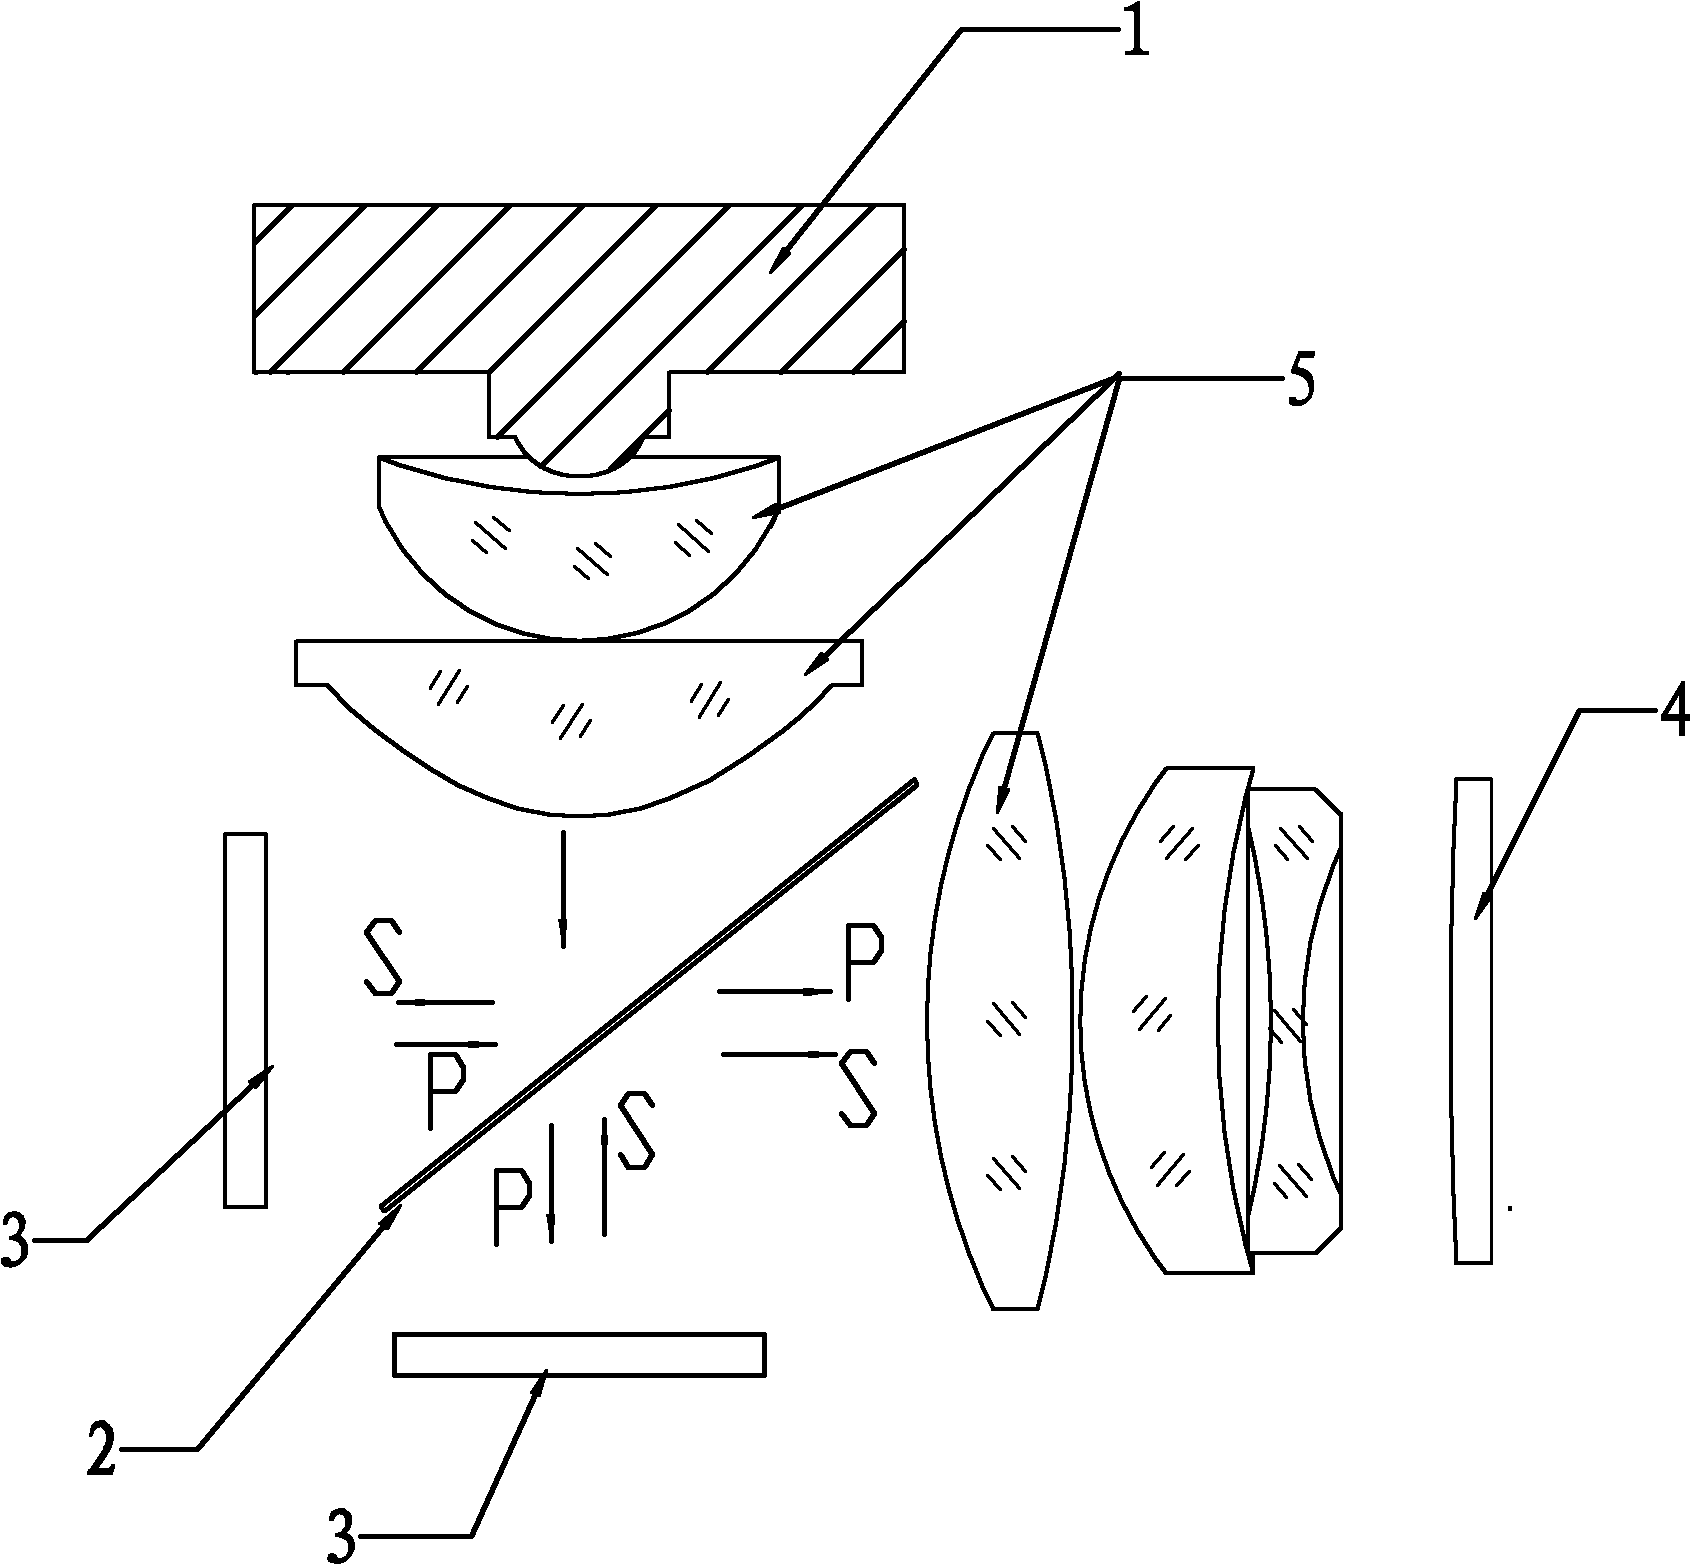 3D (three-dimensional) protection device and 3D projection method